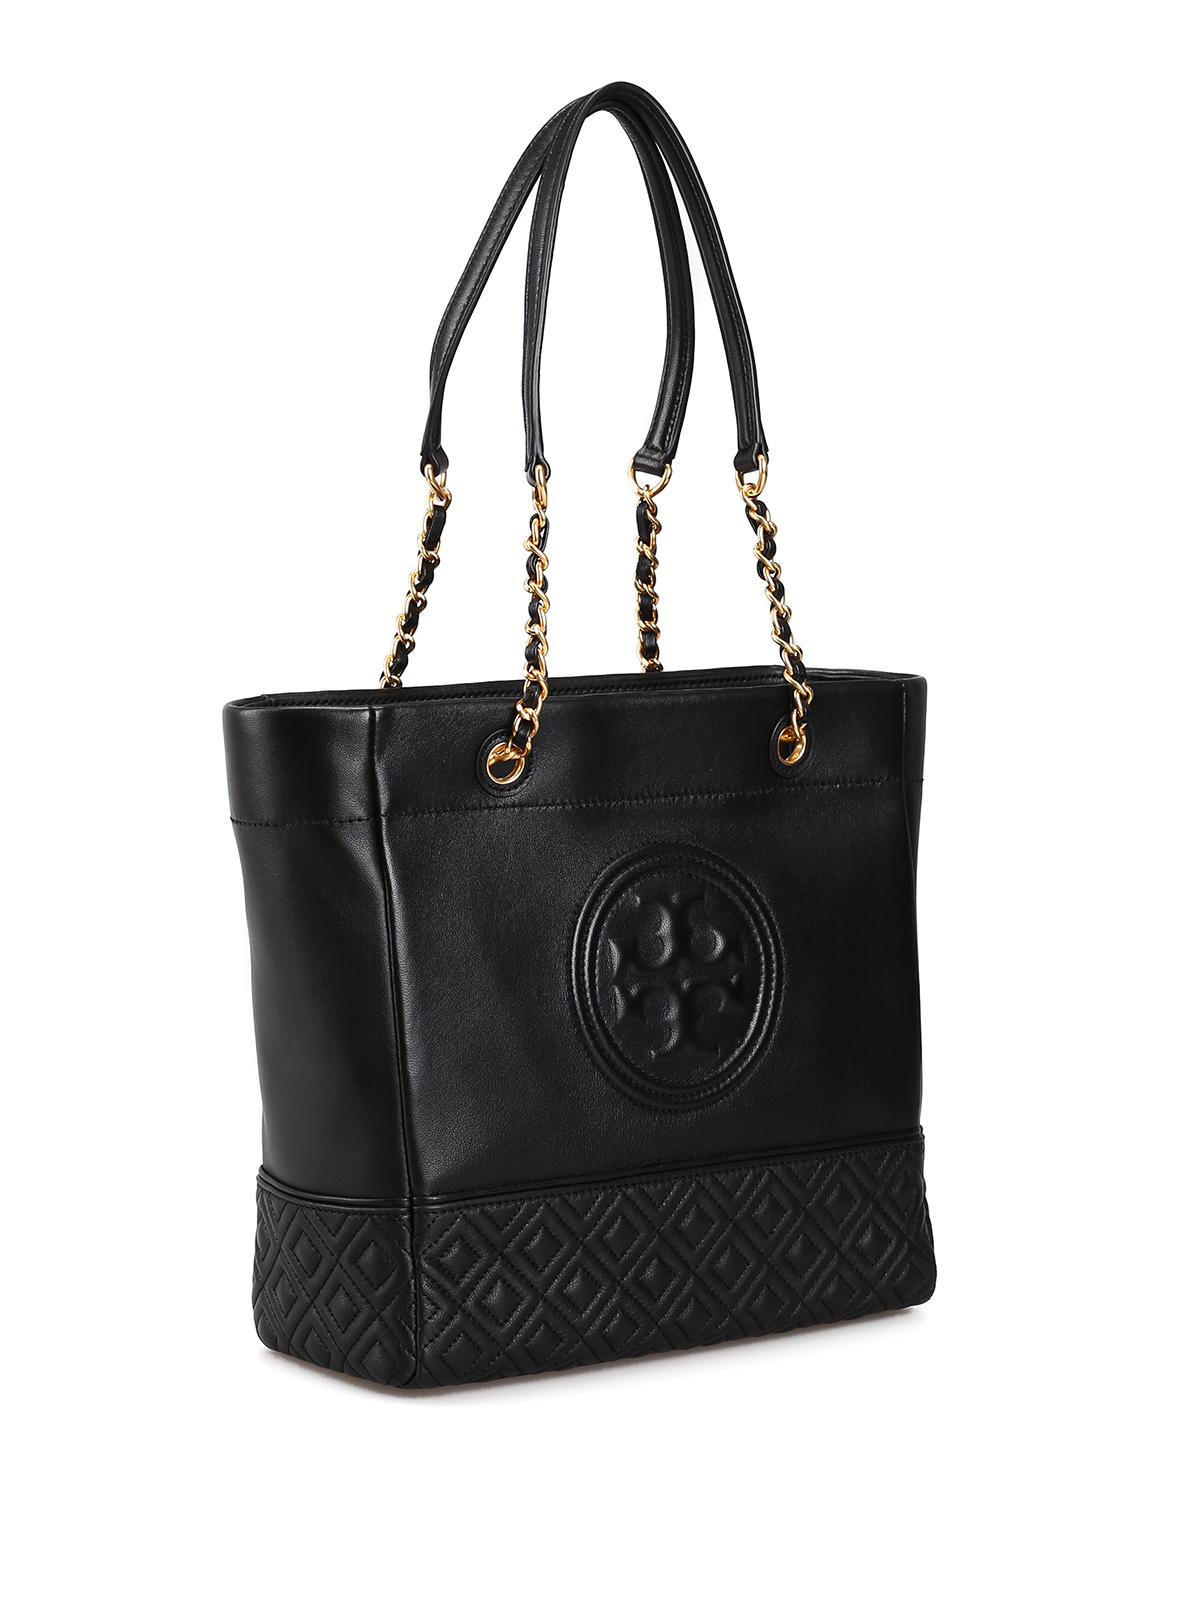 Arriba 83+ imagen tory burch black tote with gold chain